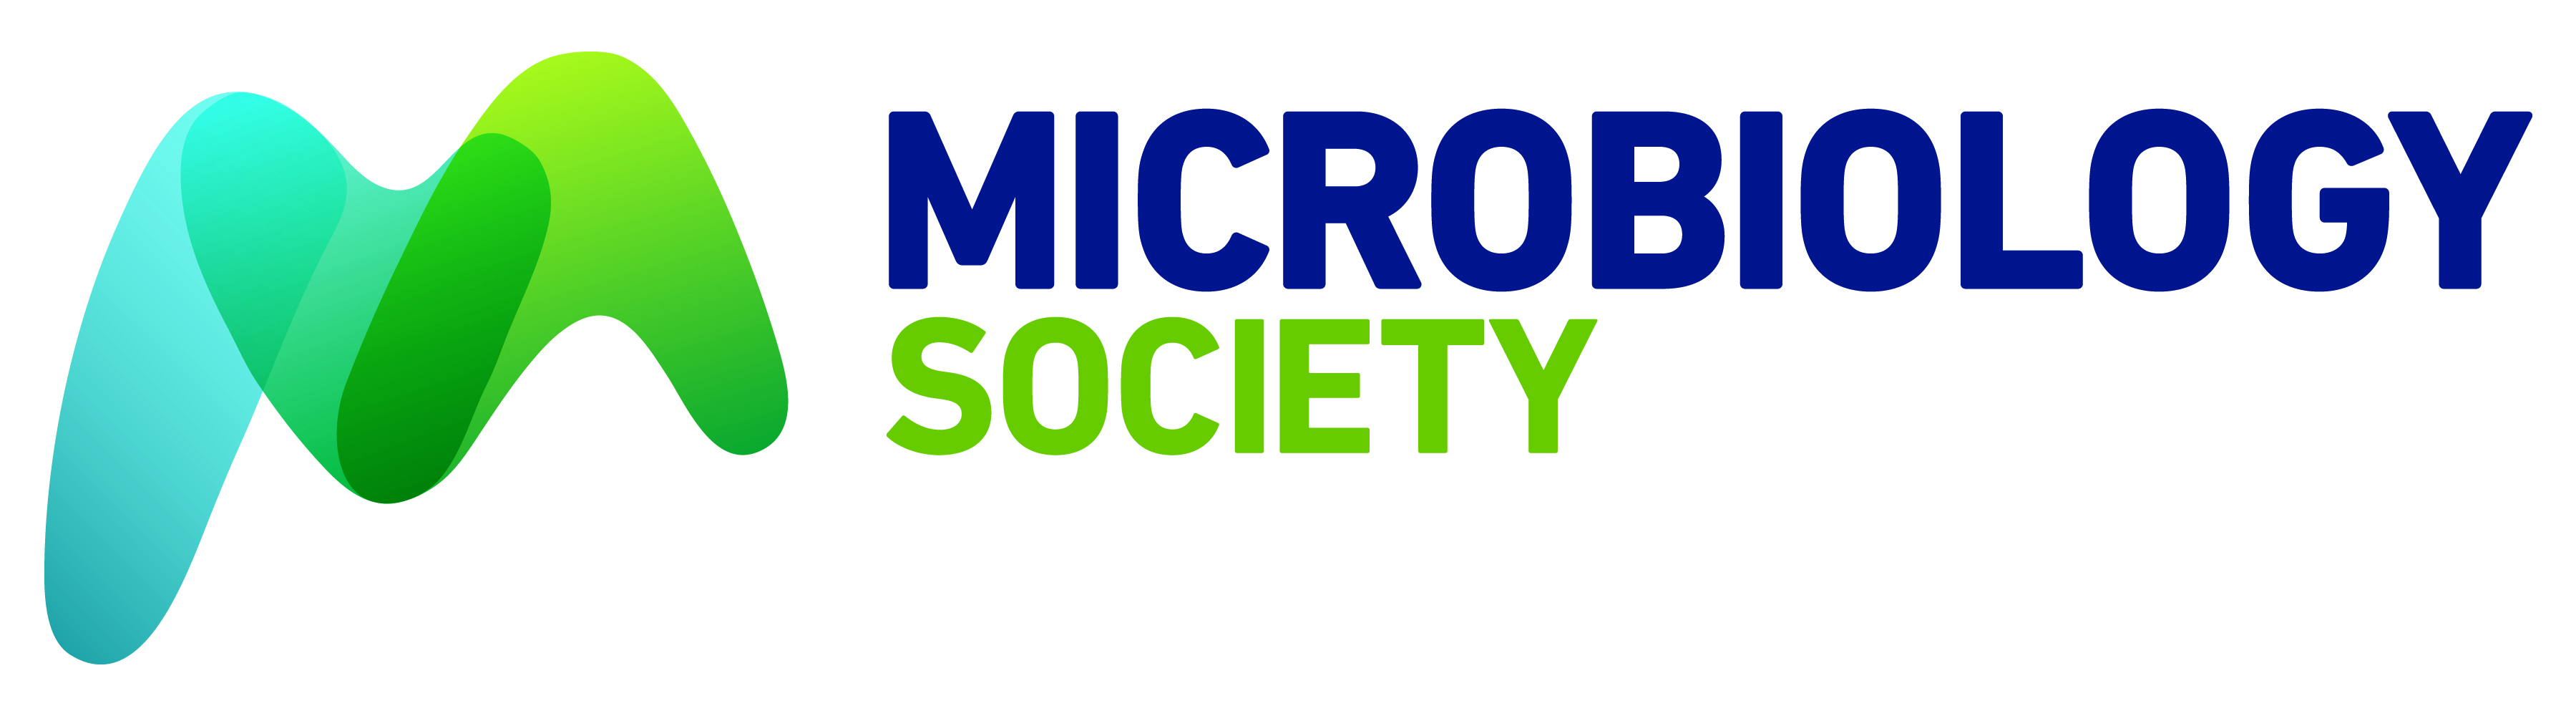 International Society for microbiology